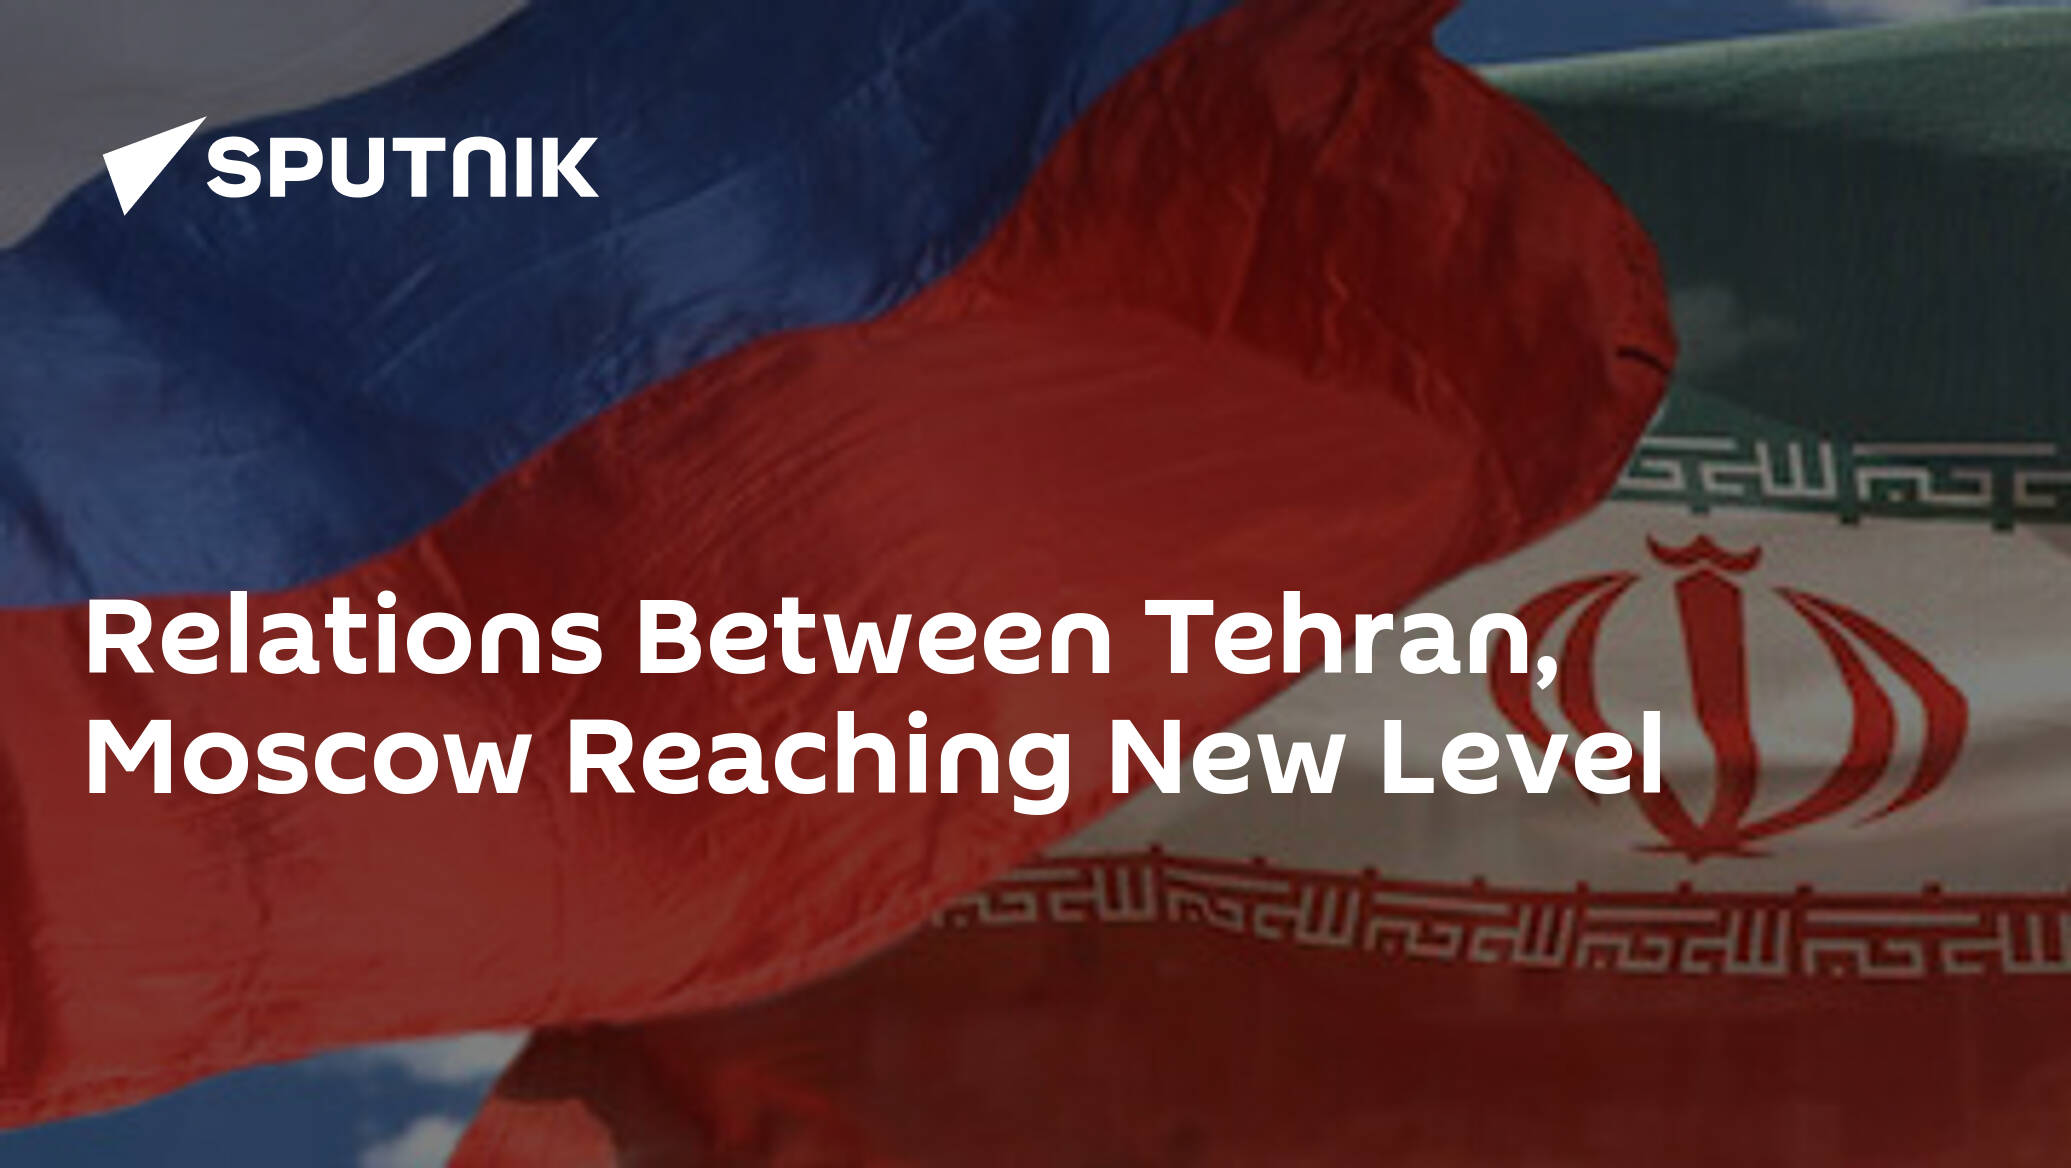 Relations Between Tehran, Moscow Reaching New Level